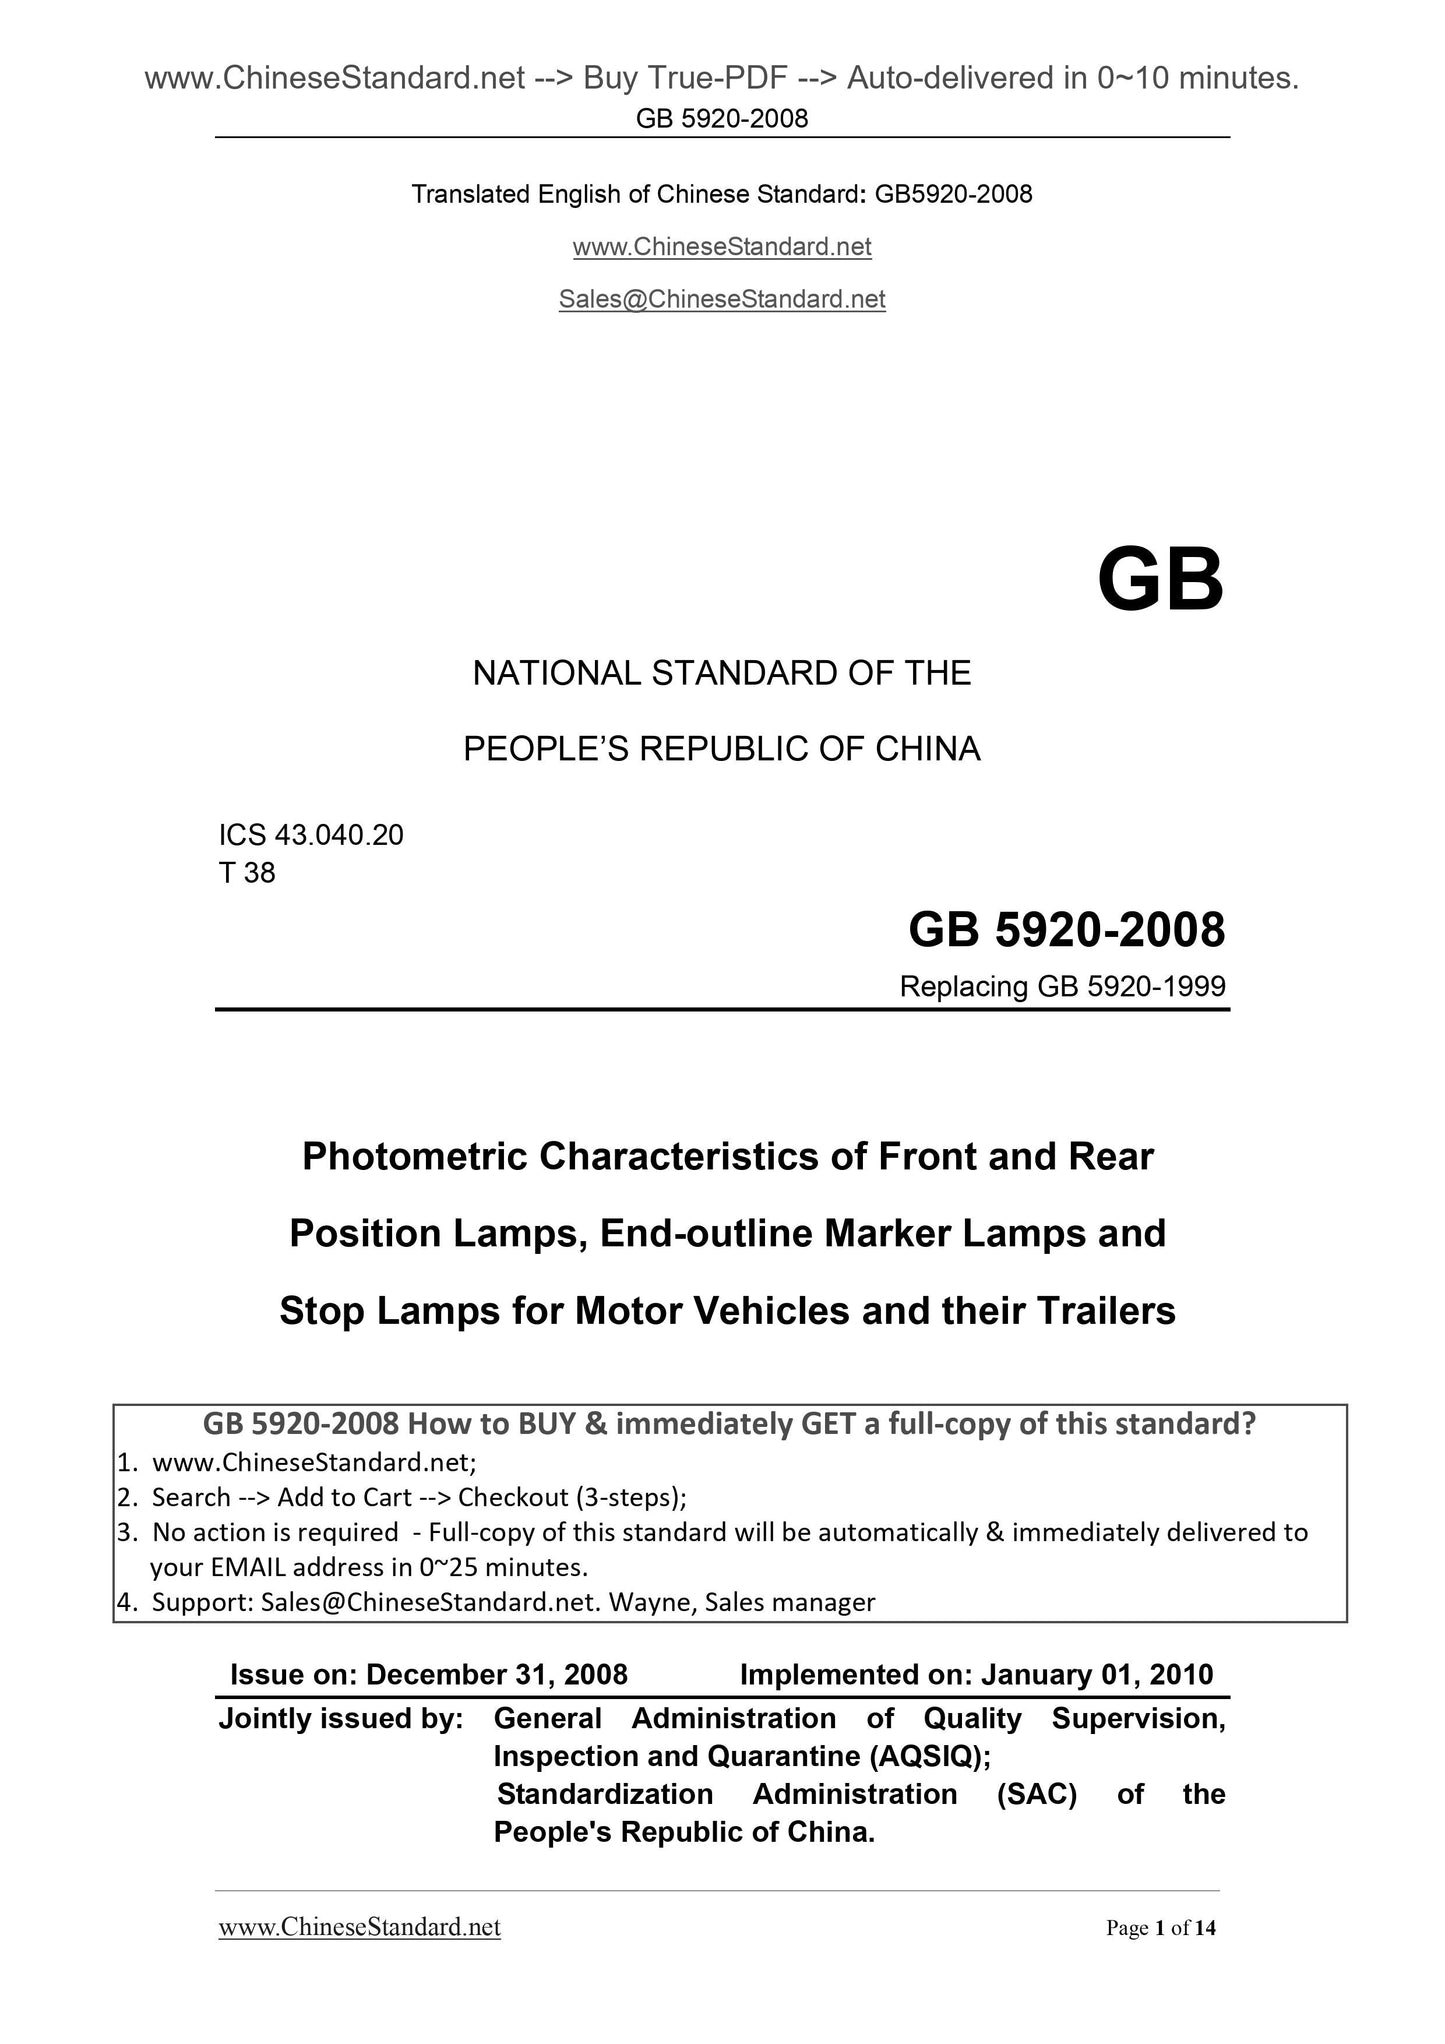 GB 5920-2008 Page 1